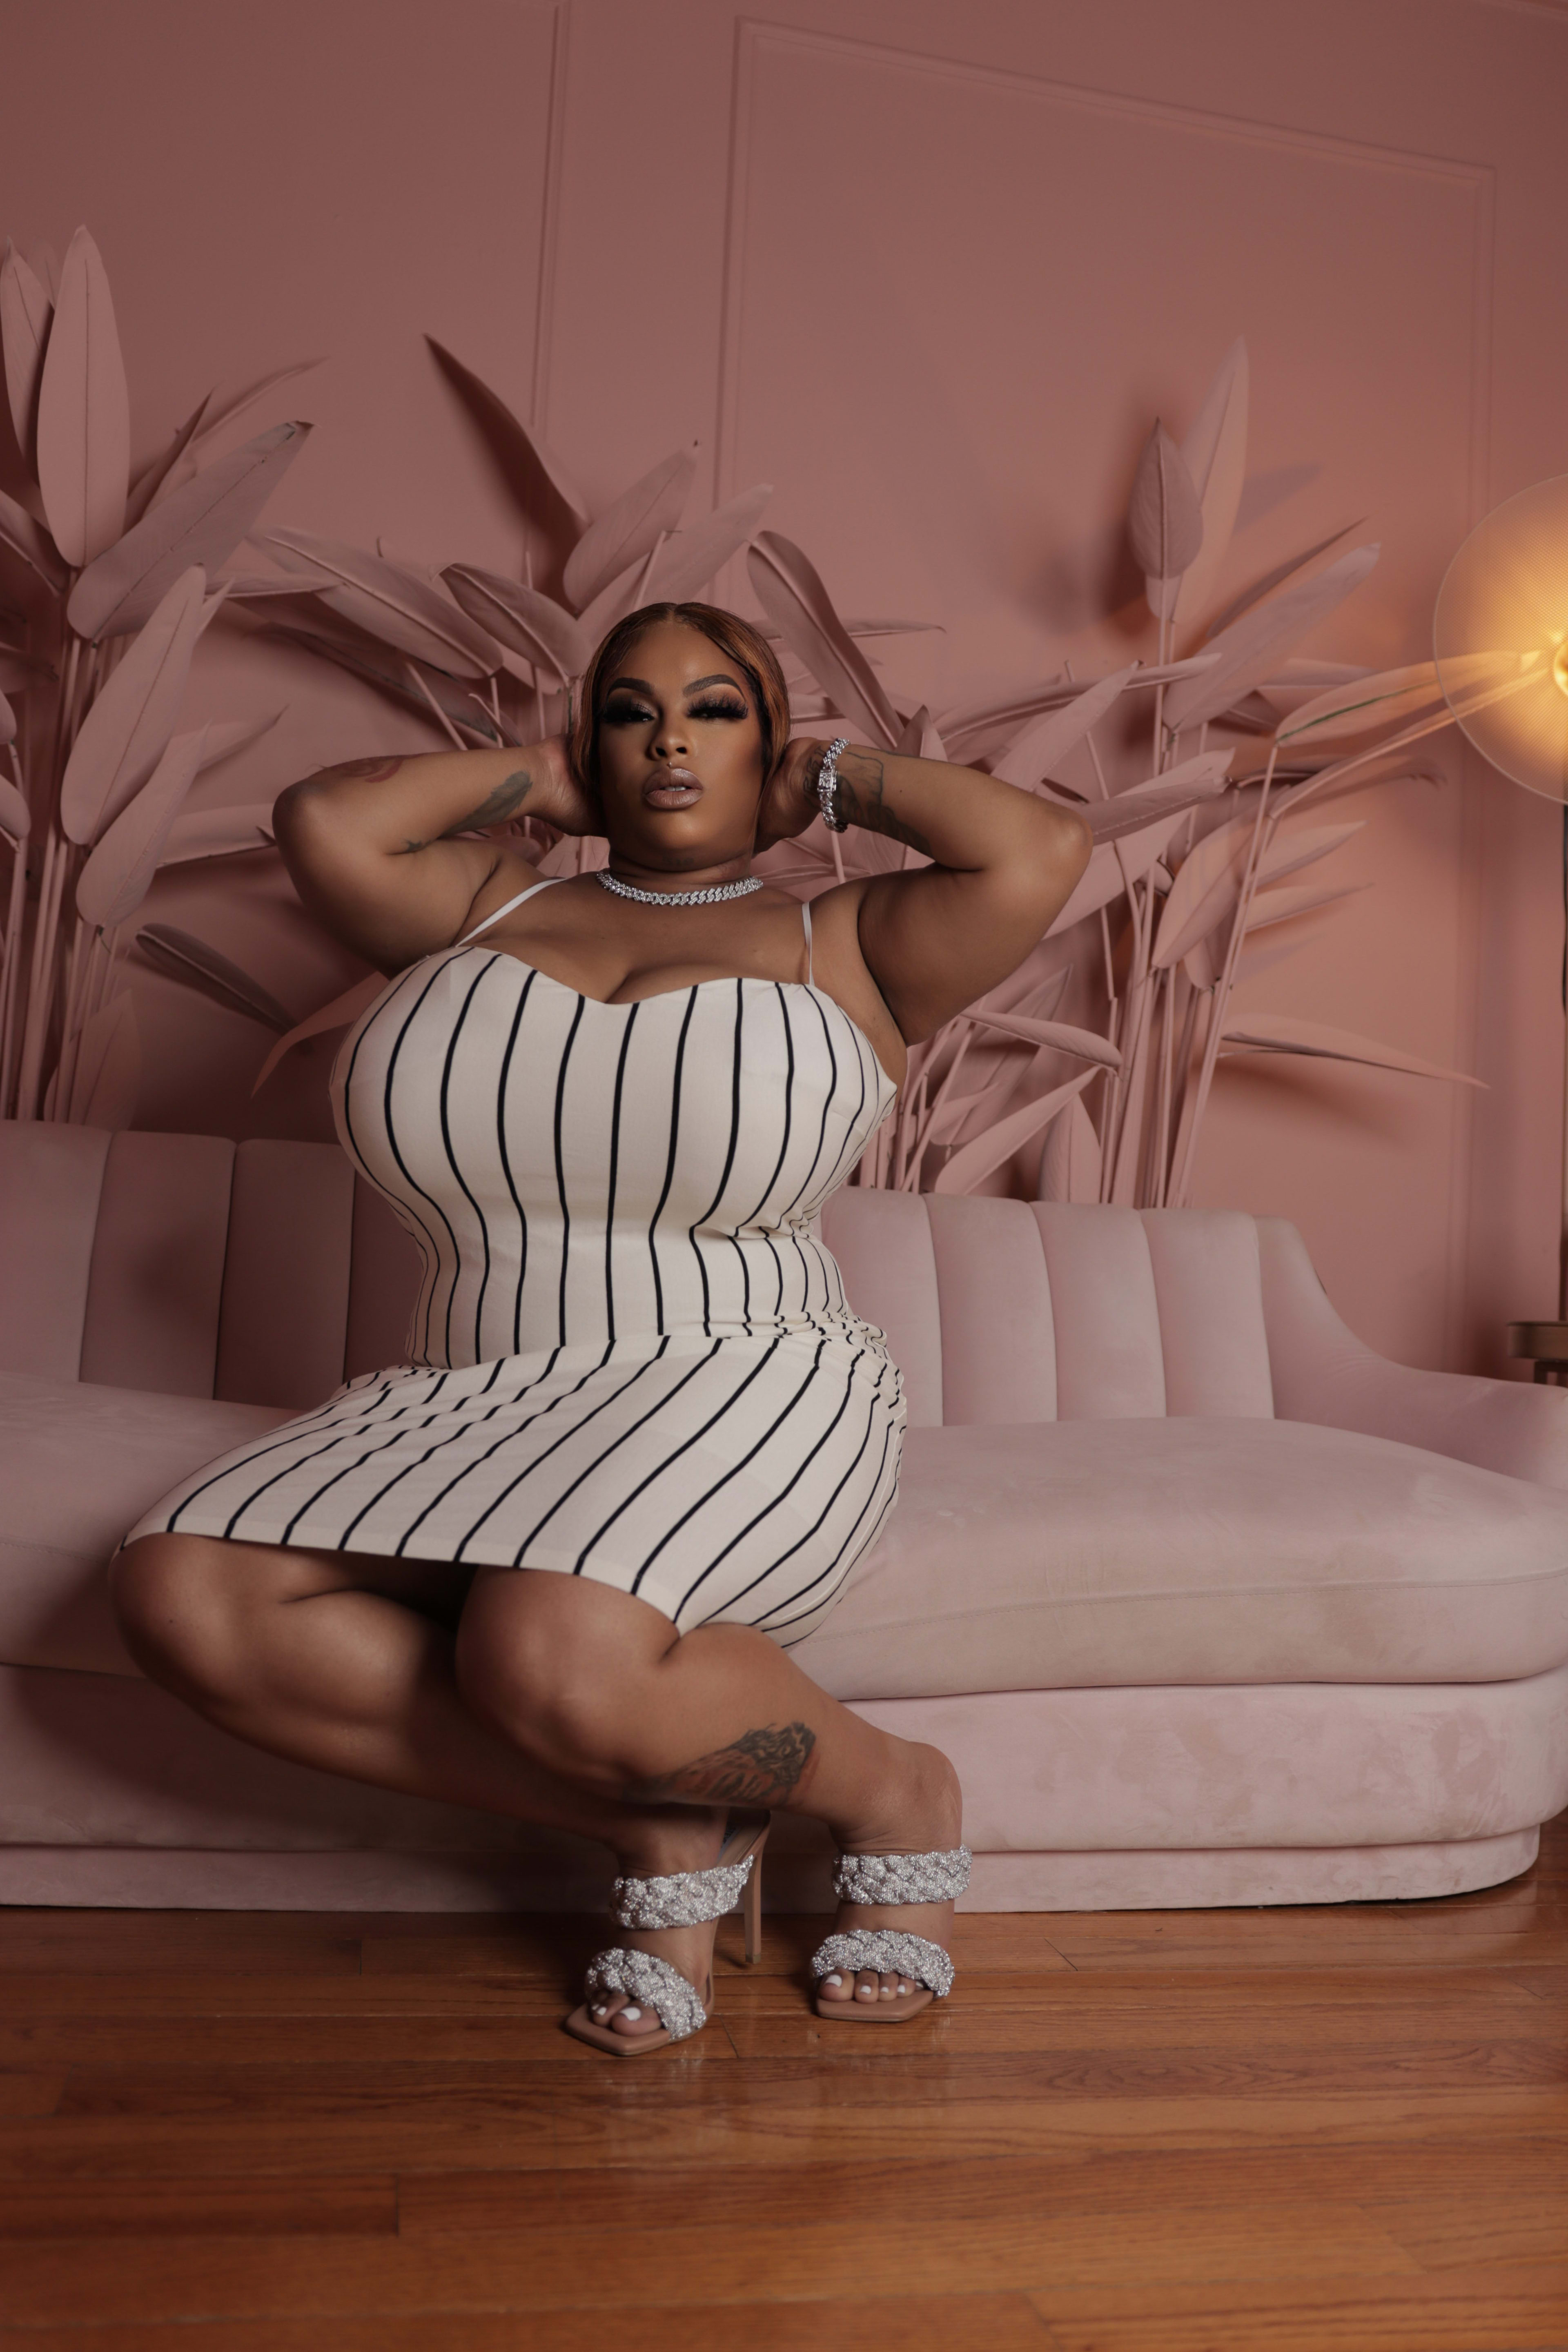 A woman in a striped dress posing for a fashion photoshoot on a pink couch.